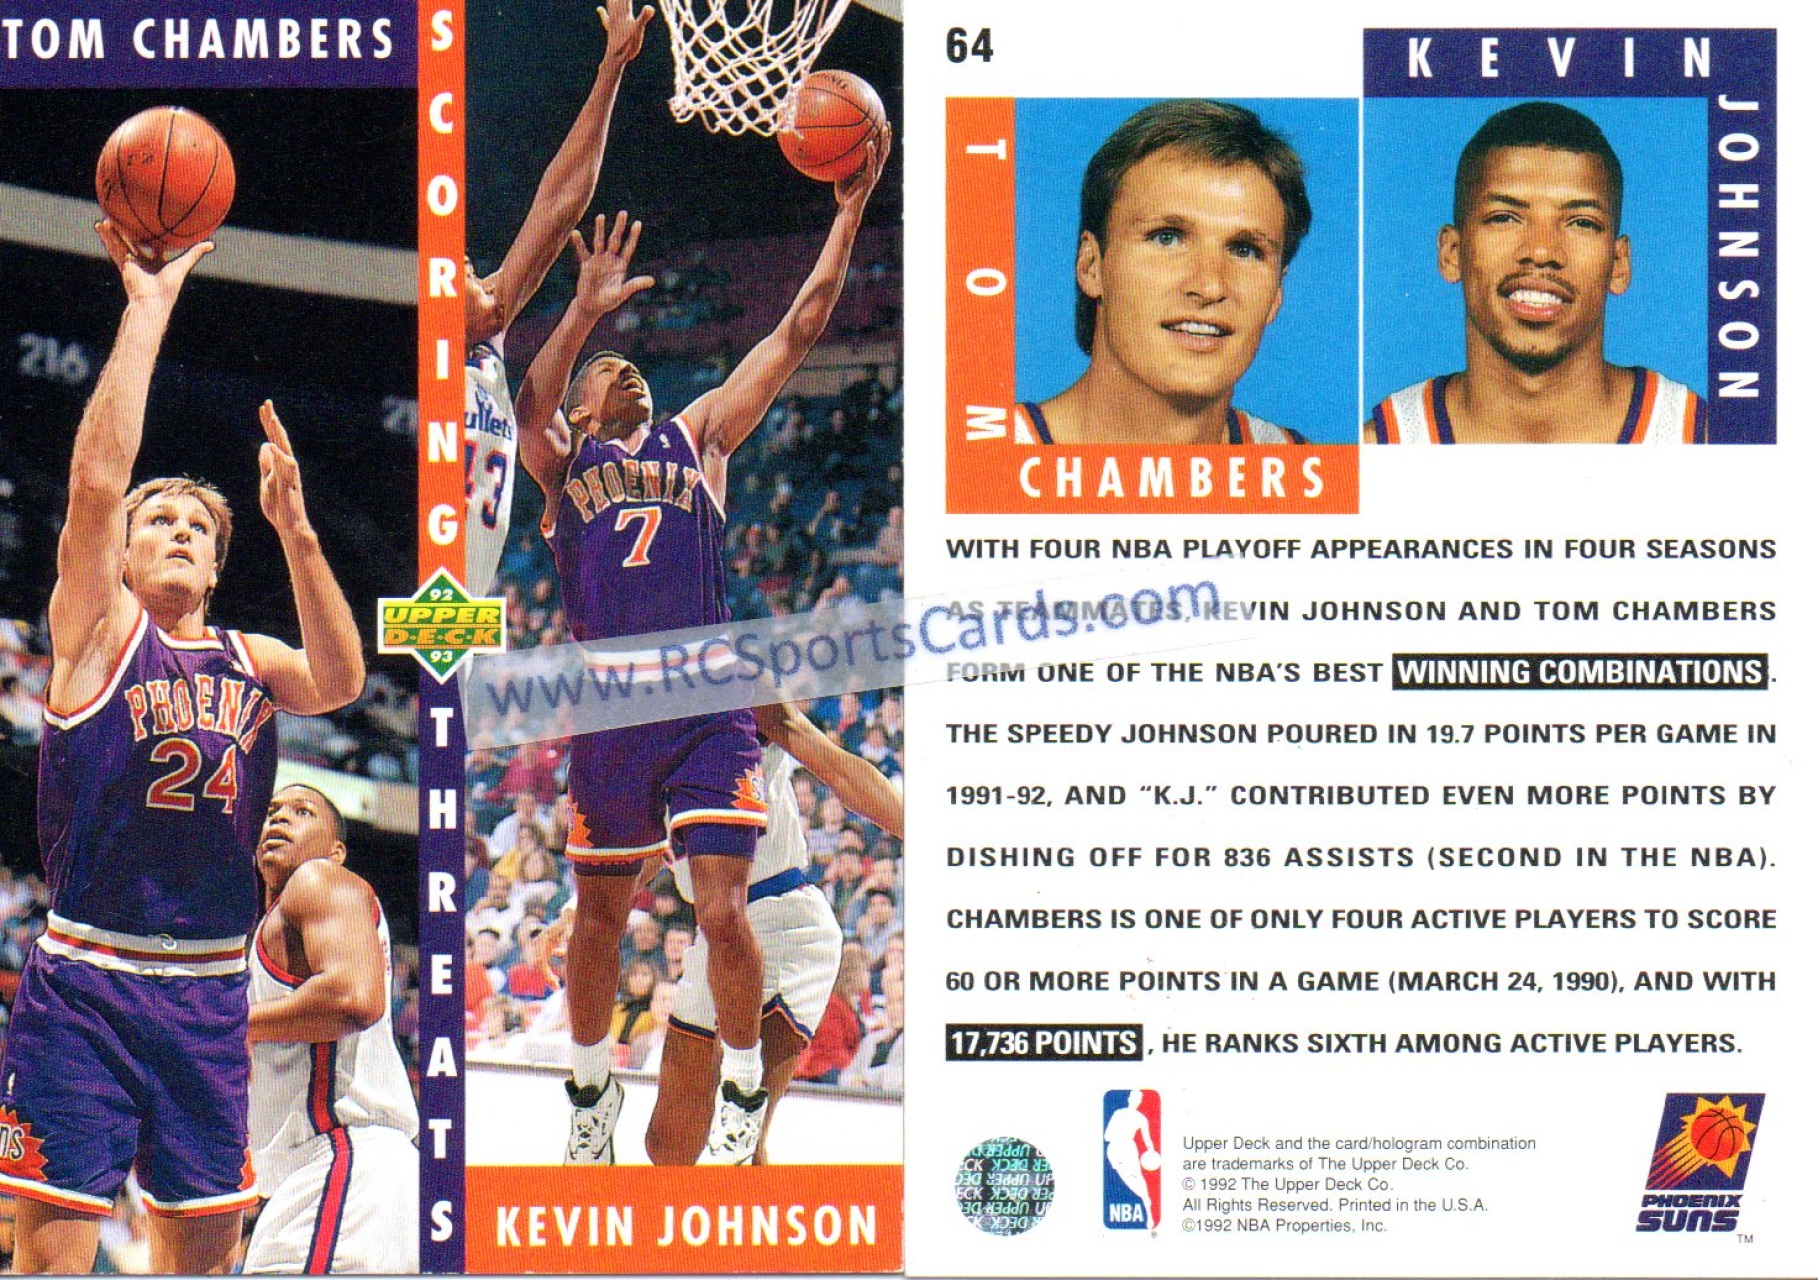  1992-93 Ultra Basketball #143 Tom Chambers Phoenix Suns  Official NBA Trading Card From The Fleer Corp : Collectibles & Fine Art